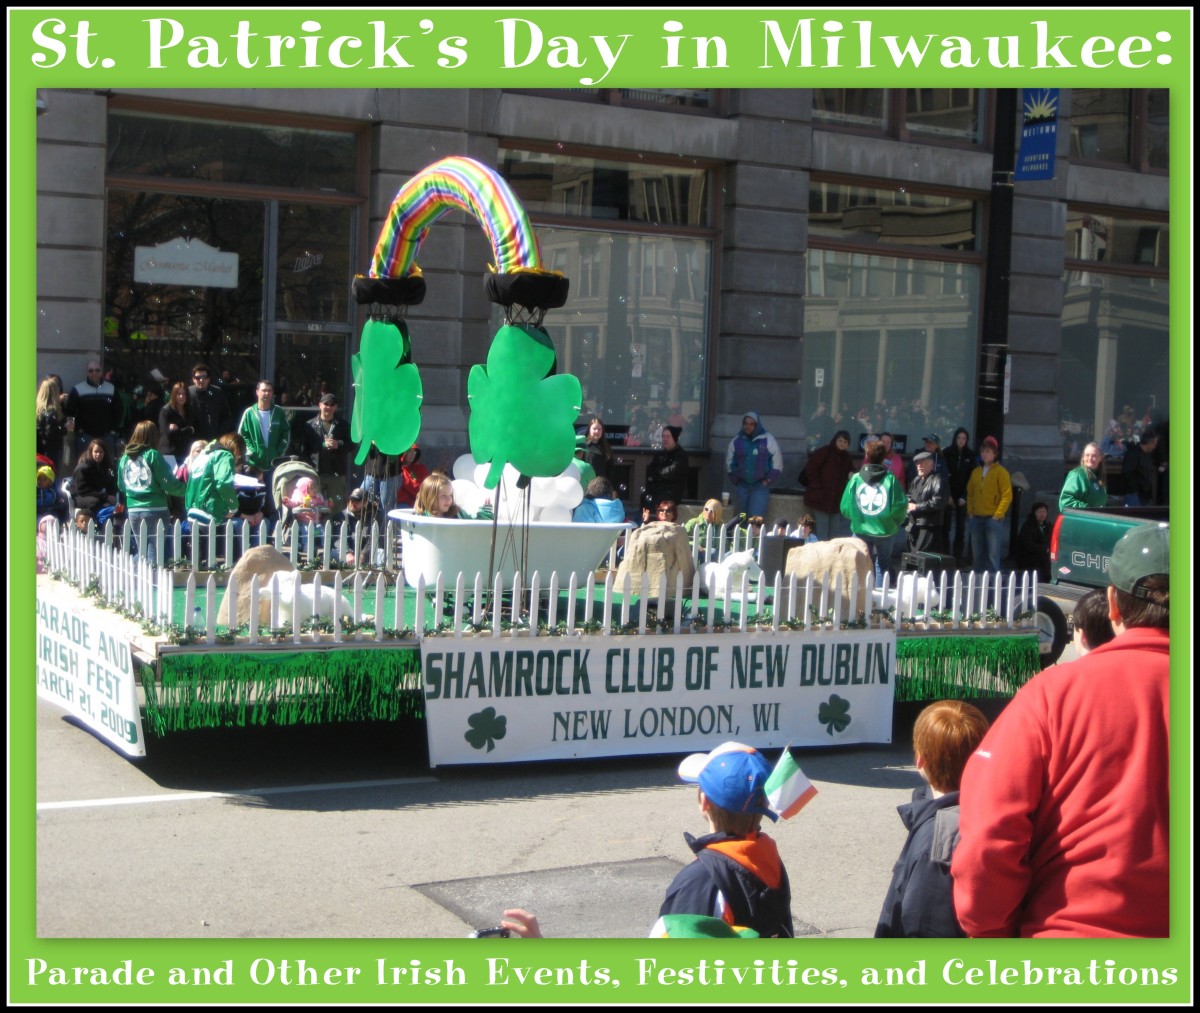 St. Patrick's Day in Milwaukee: Parade and Other Irish Events, Festivities, and Celebrations